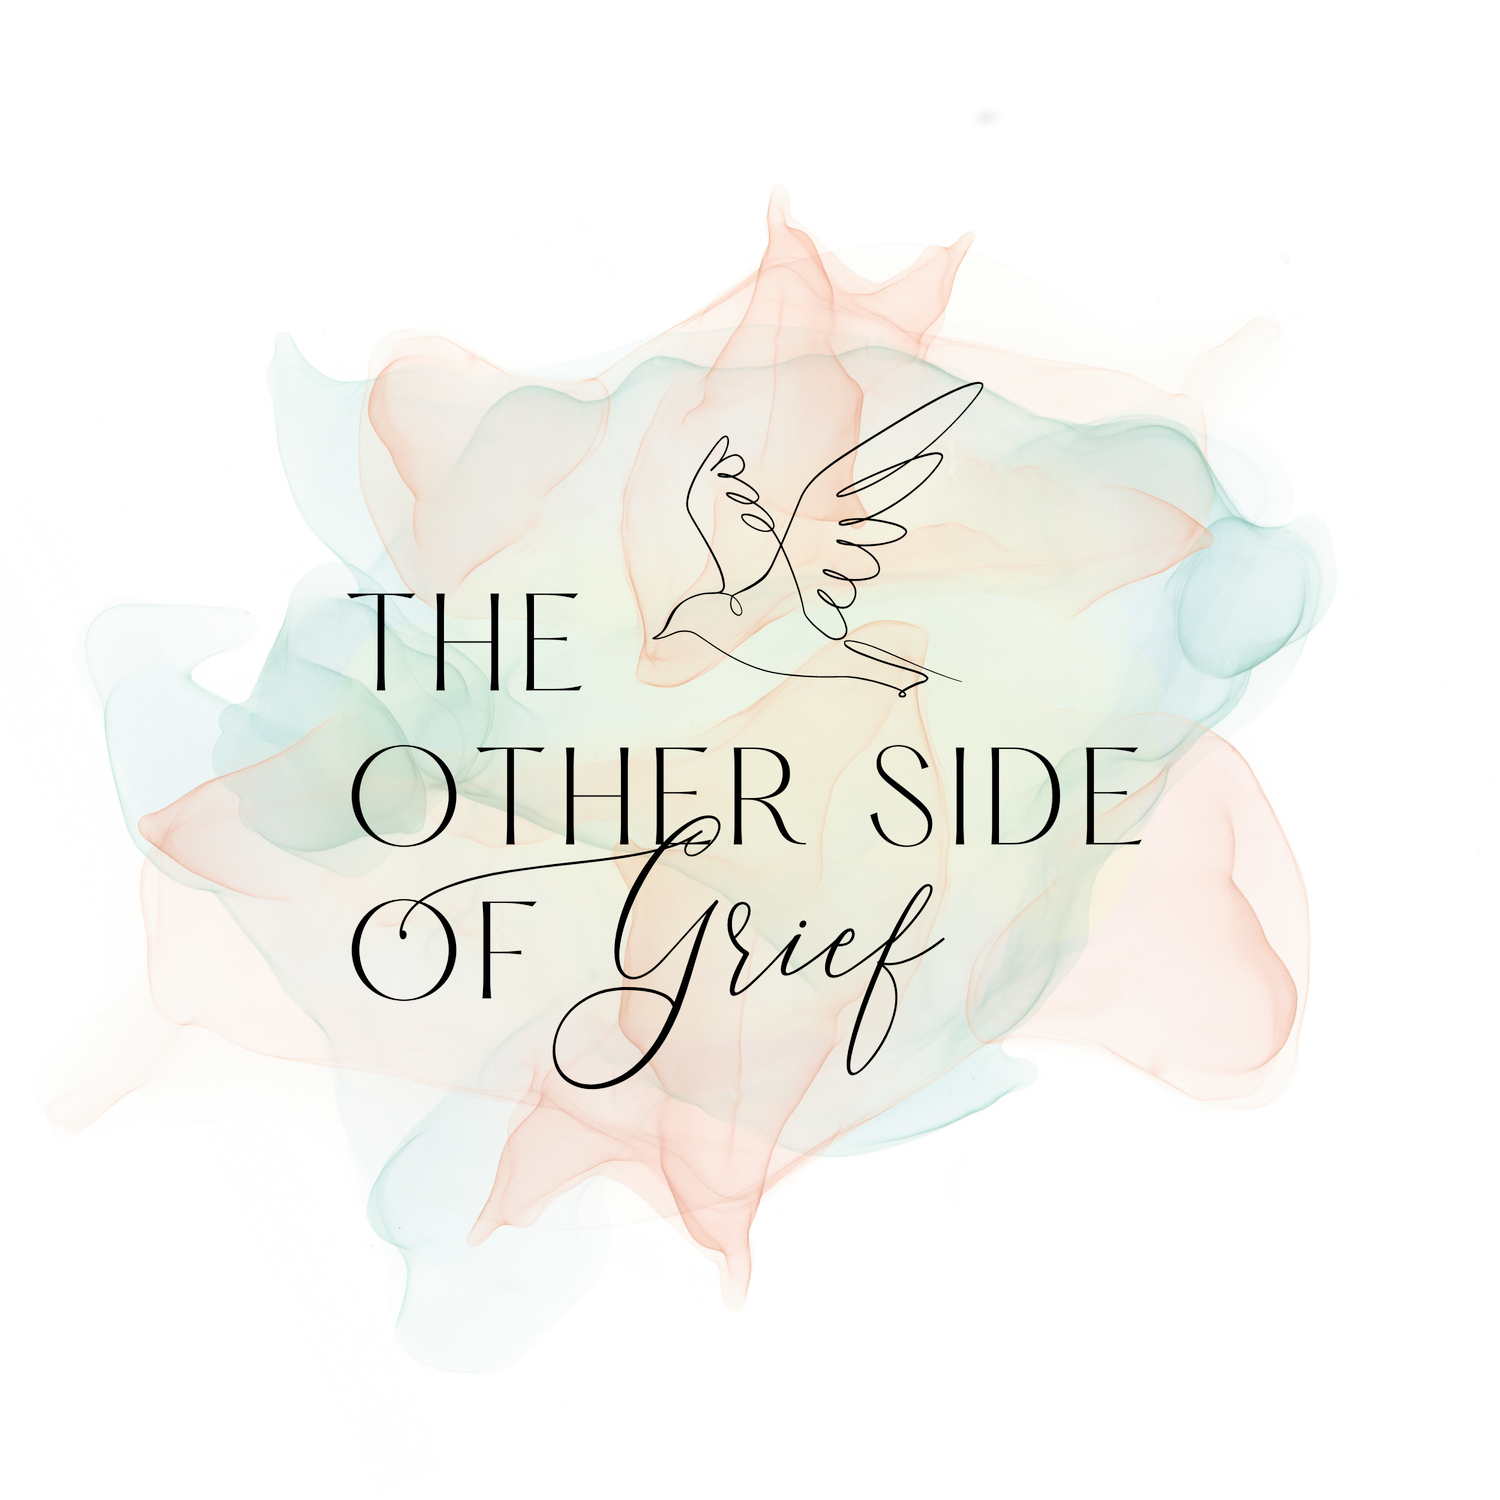 The Other Side of Grief 